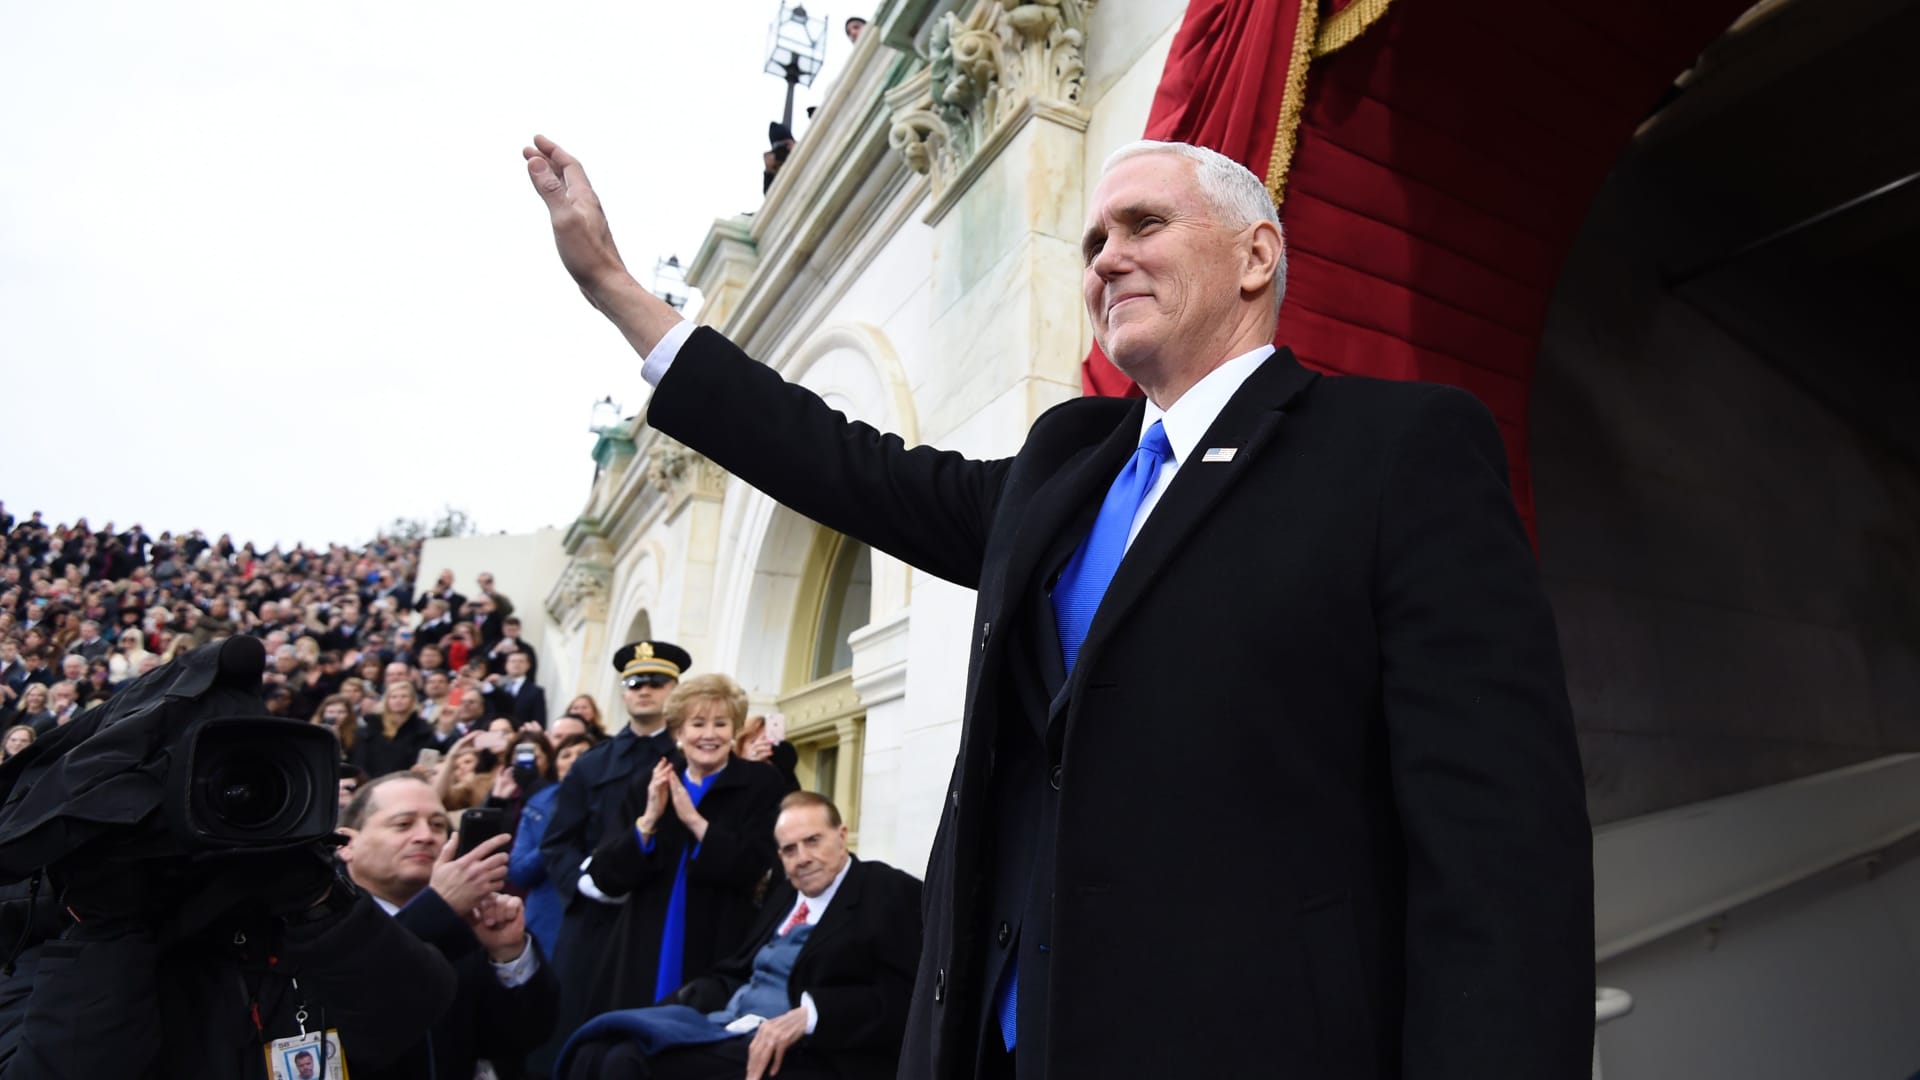 Vice President-elect Mike Pence arrives for the Presidential Inauguration of Donald Trump at the US Capitol in Washington, DC, on January 20, 2017.